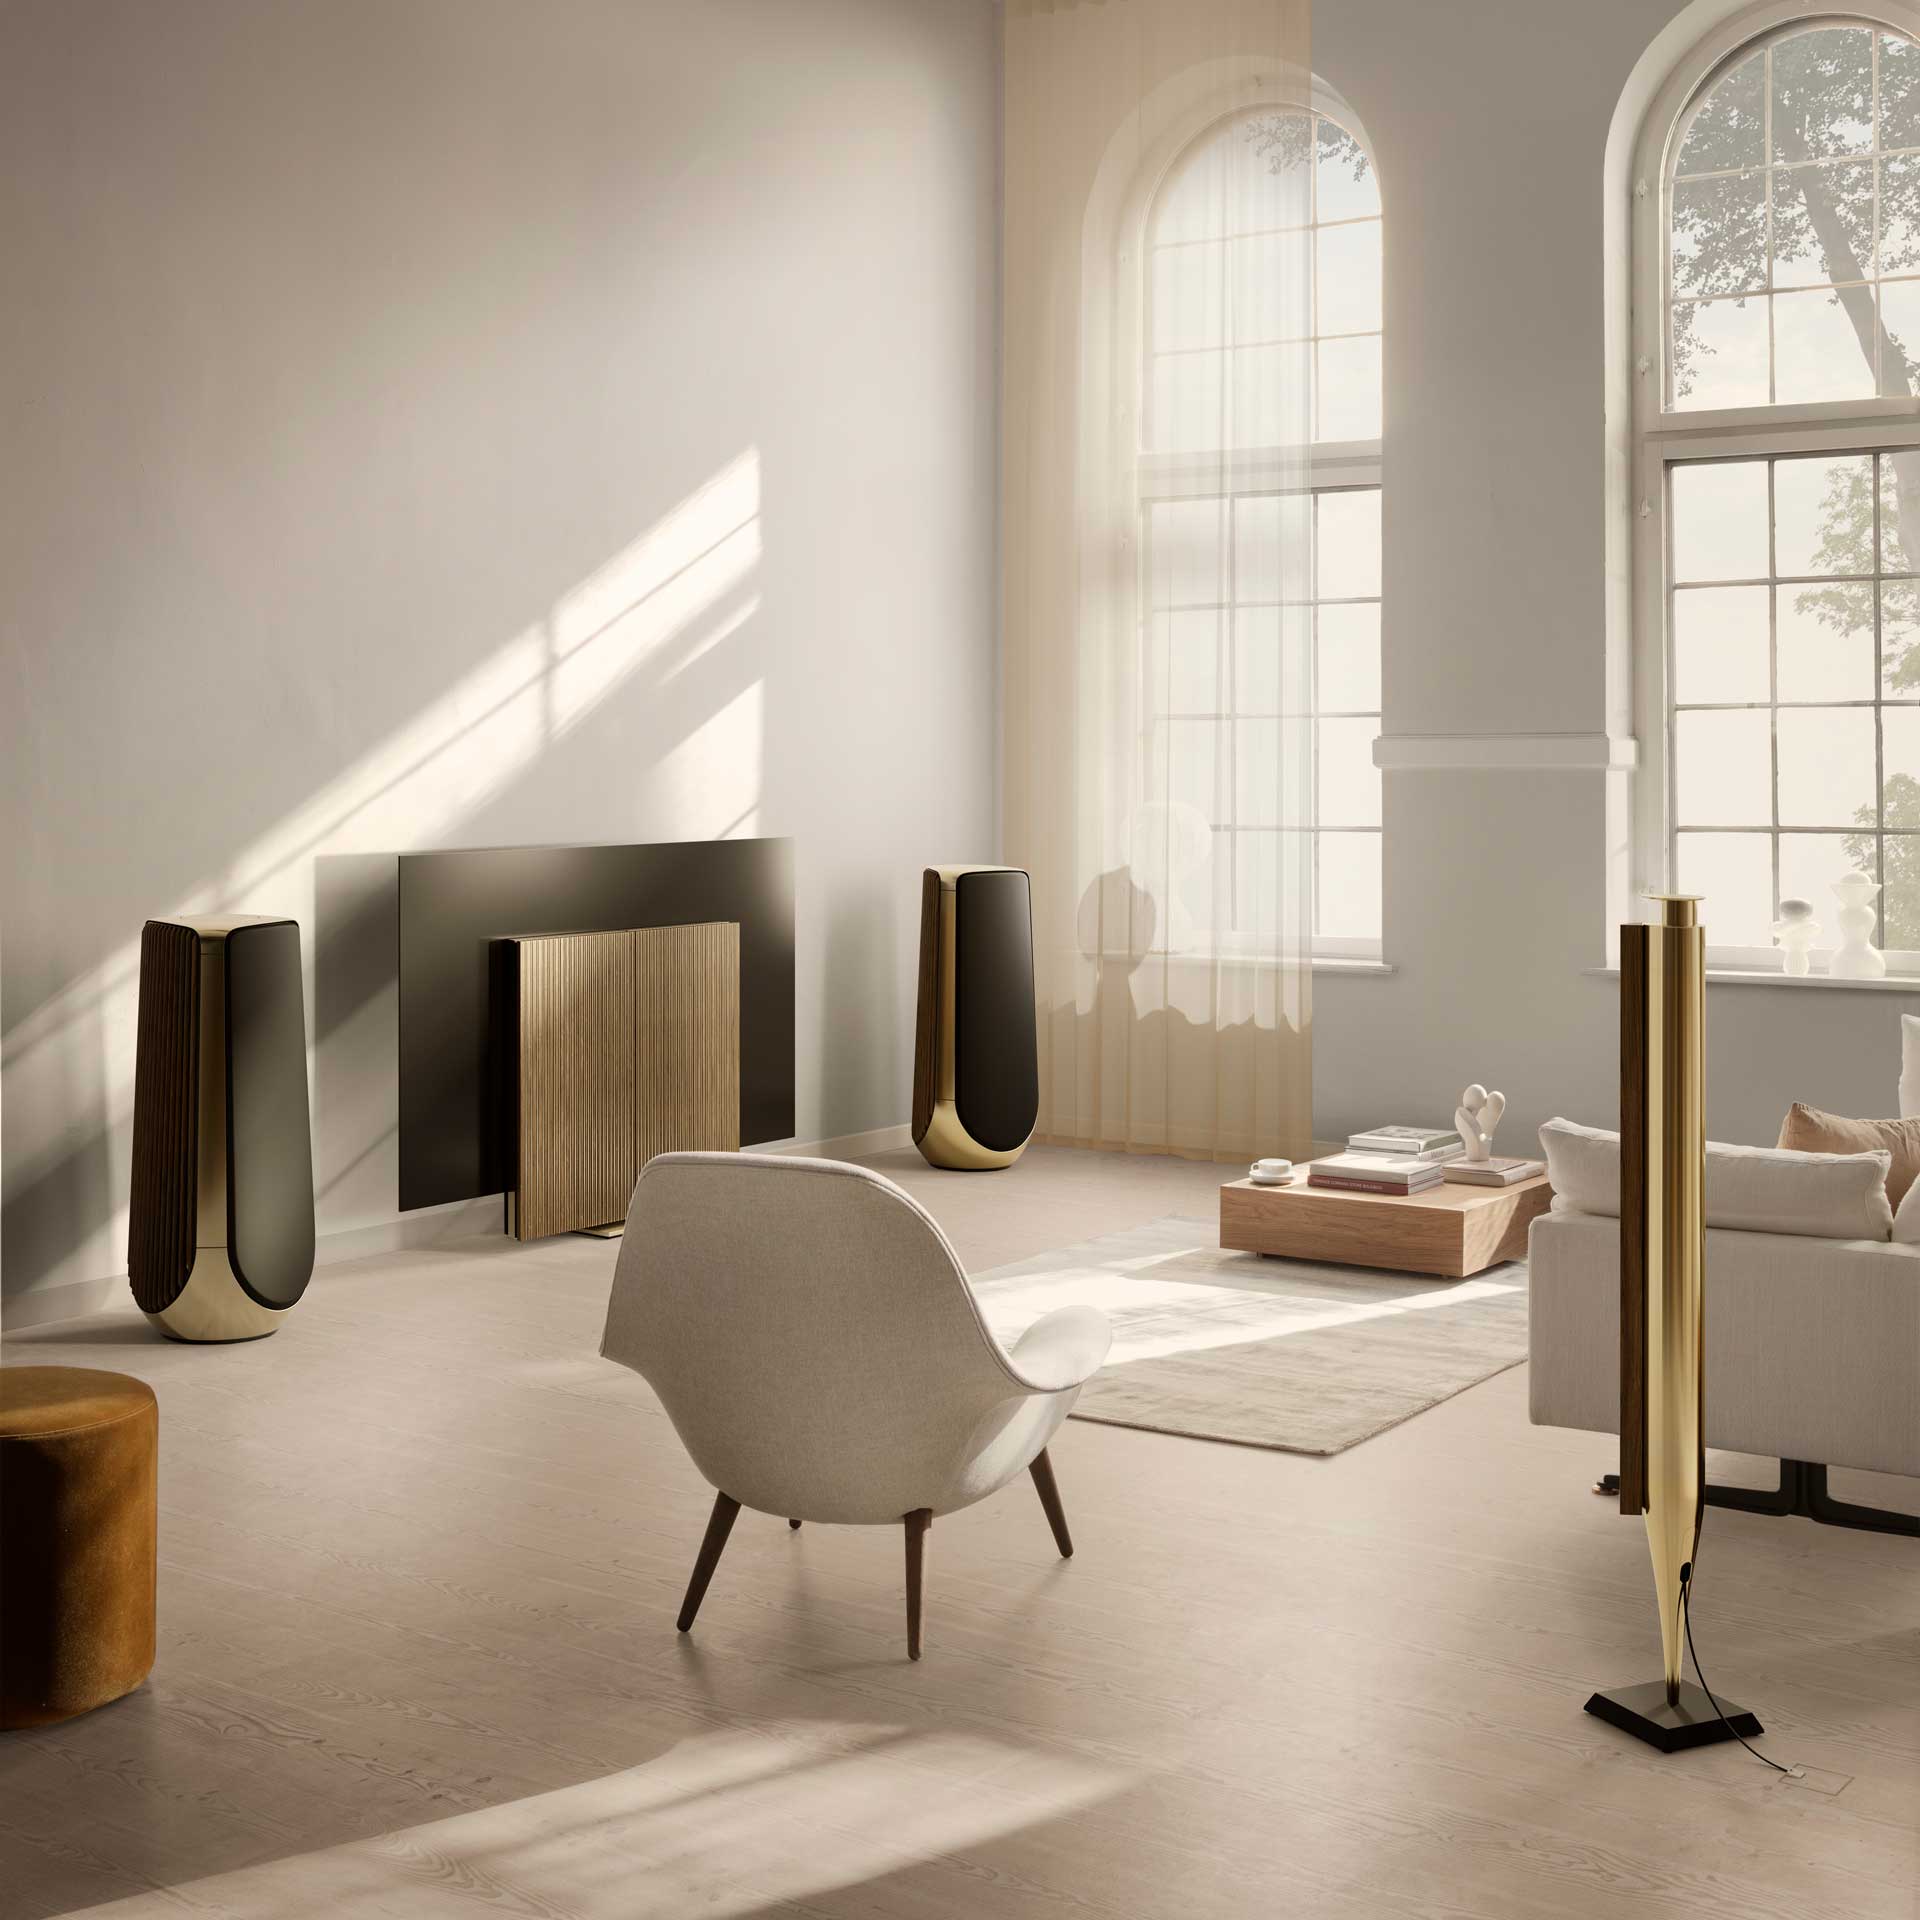 Bang & Olufsen of Ealing: Luxury home sound systems in Ealing, London, W5  5AP